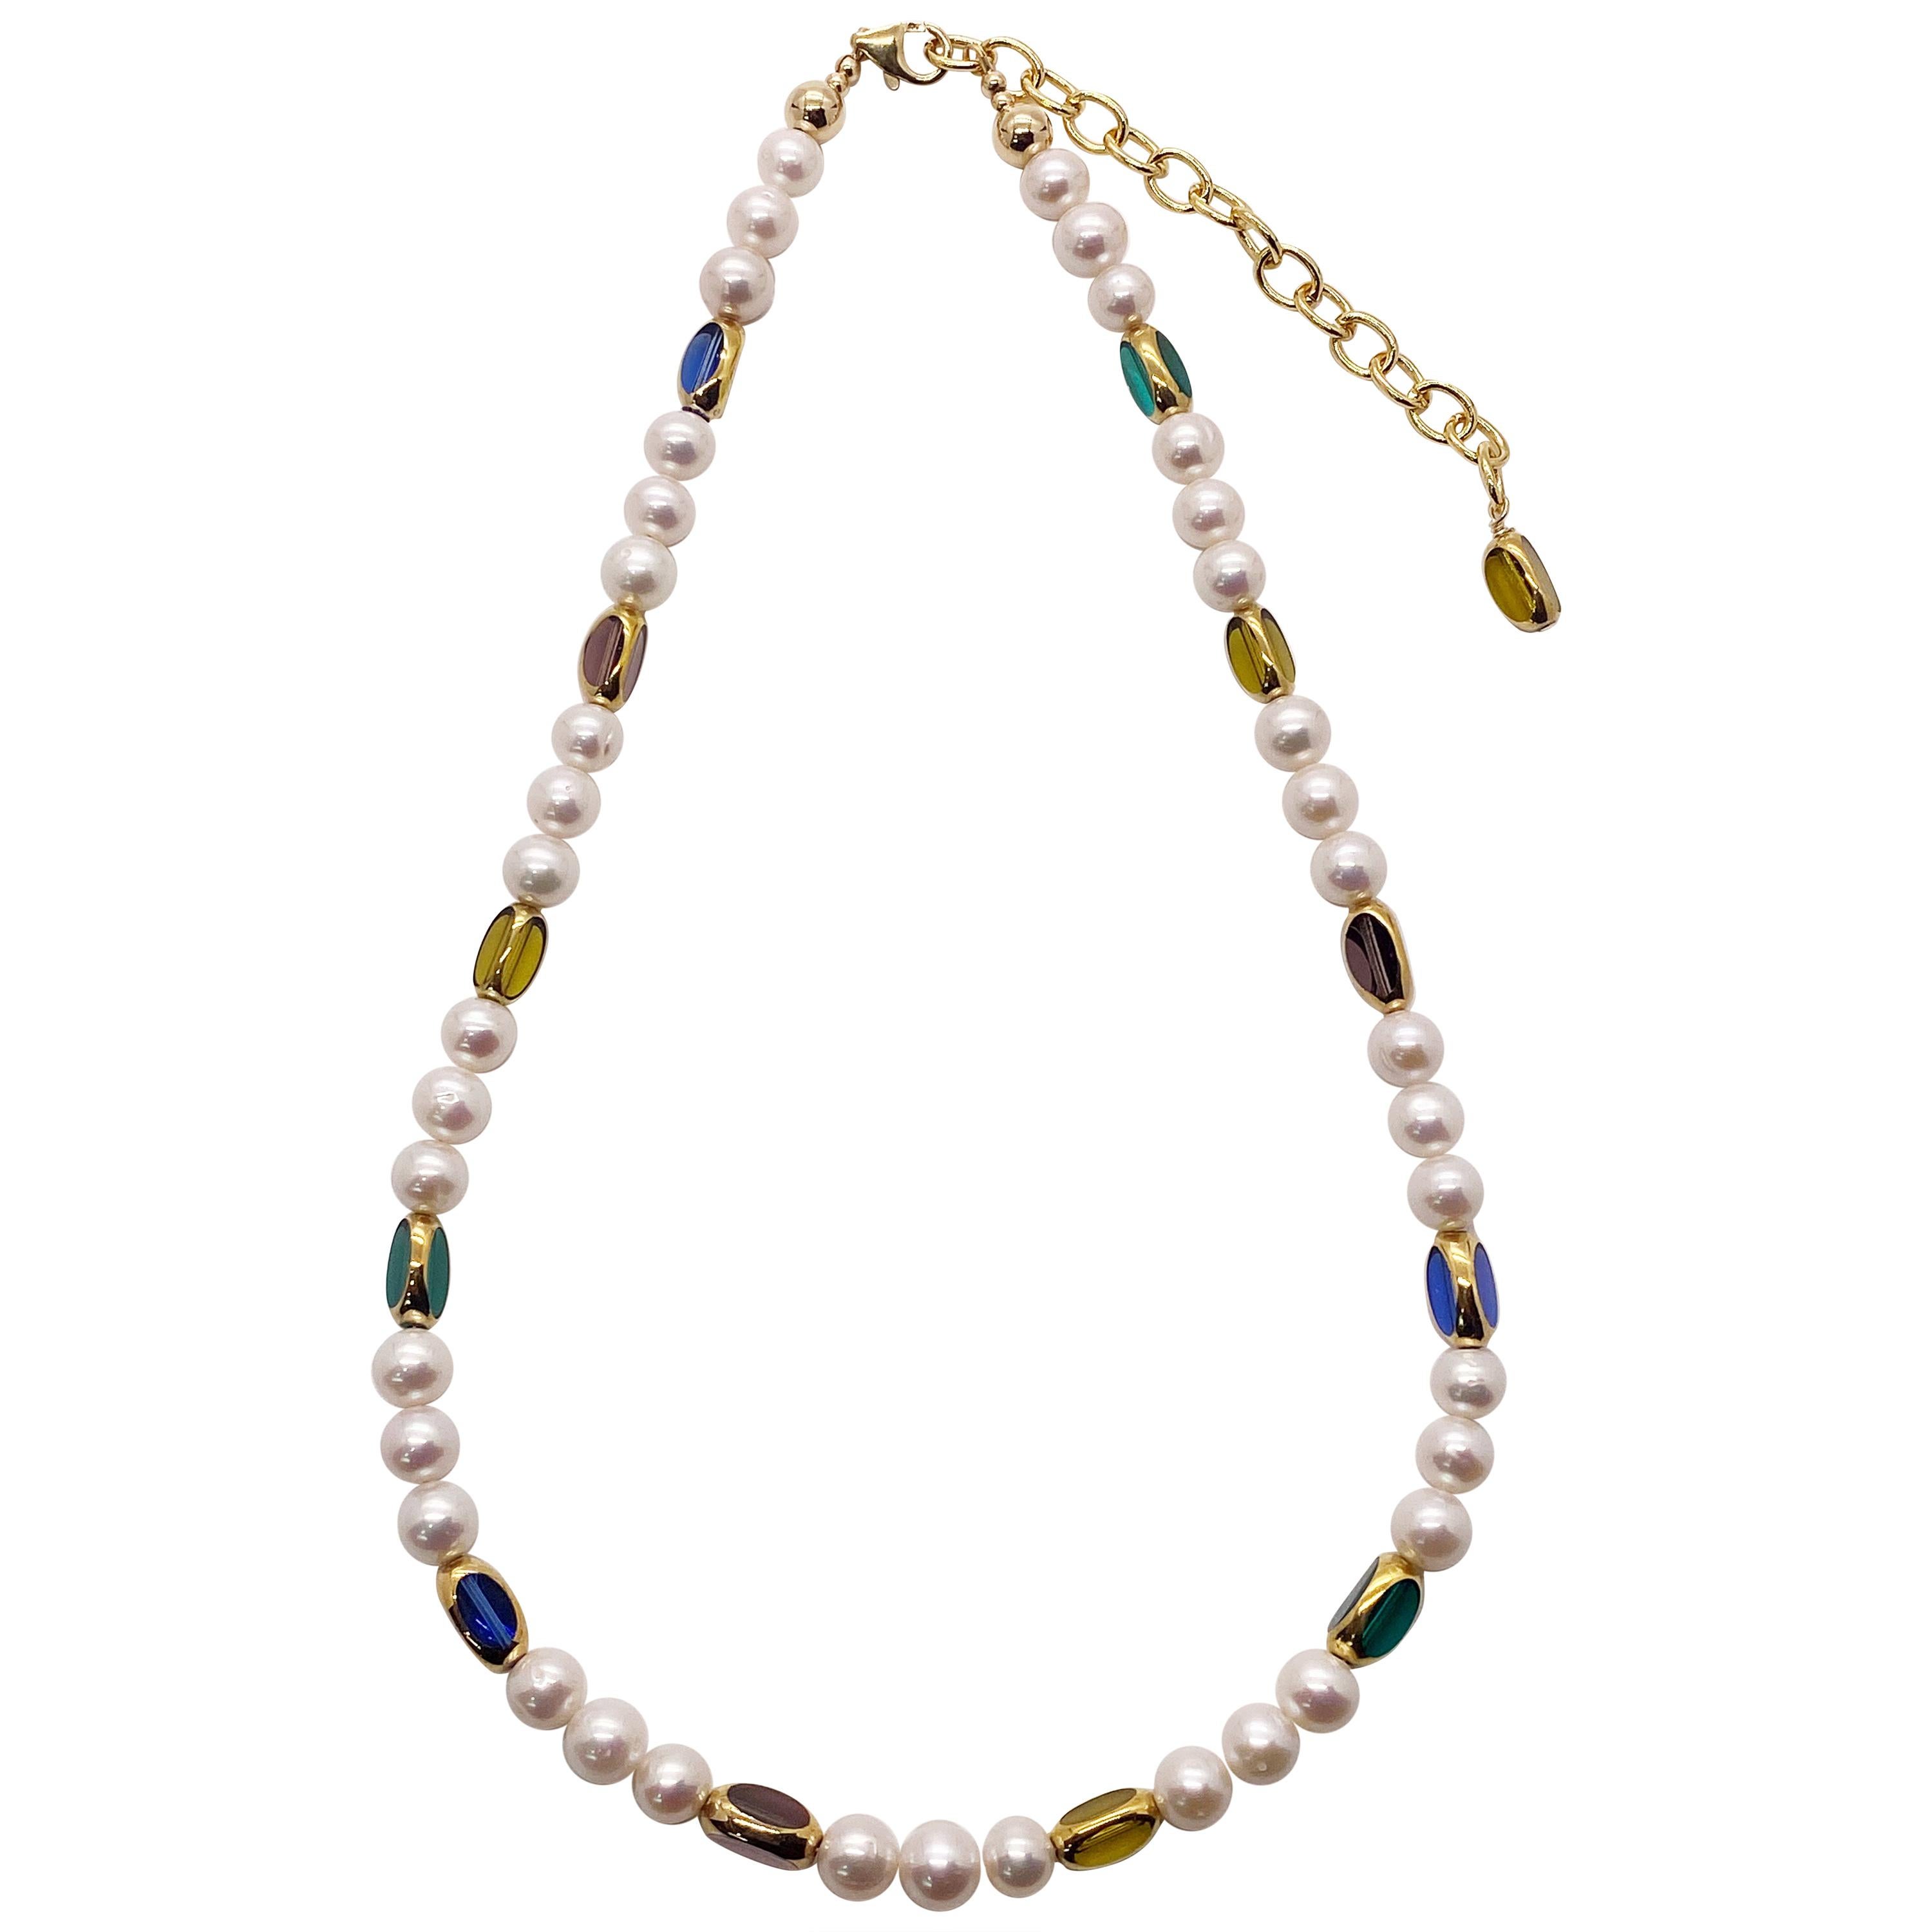 24K Gold Edged German Vintage Window Glass Beads with Freshwater Pearls